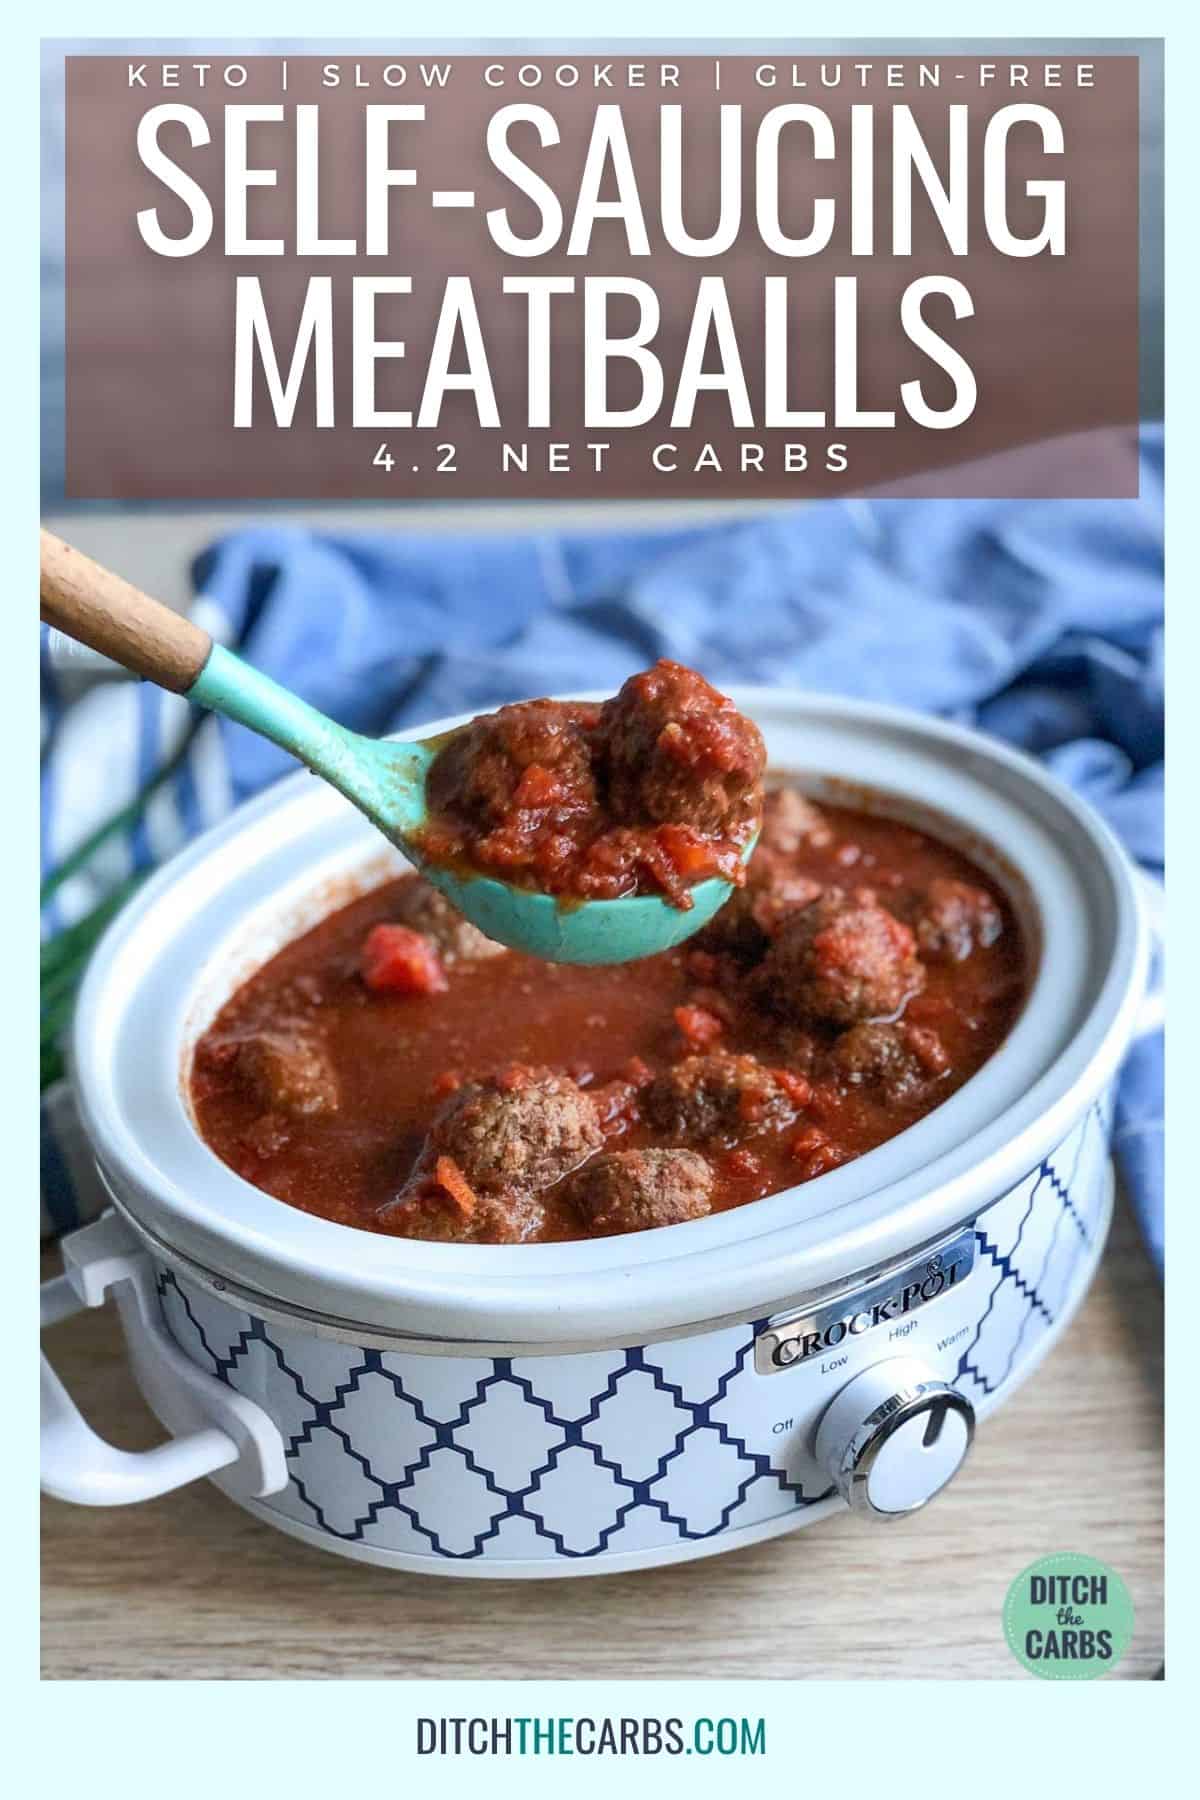 meatballs being served from a slow-cooker